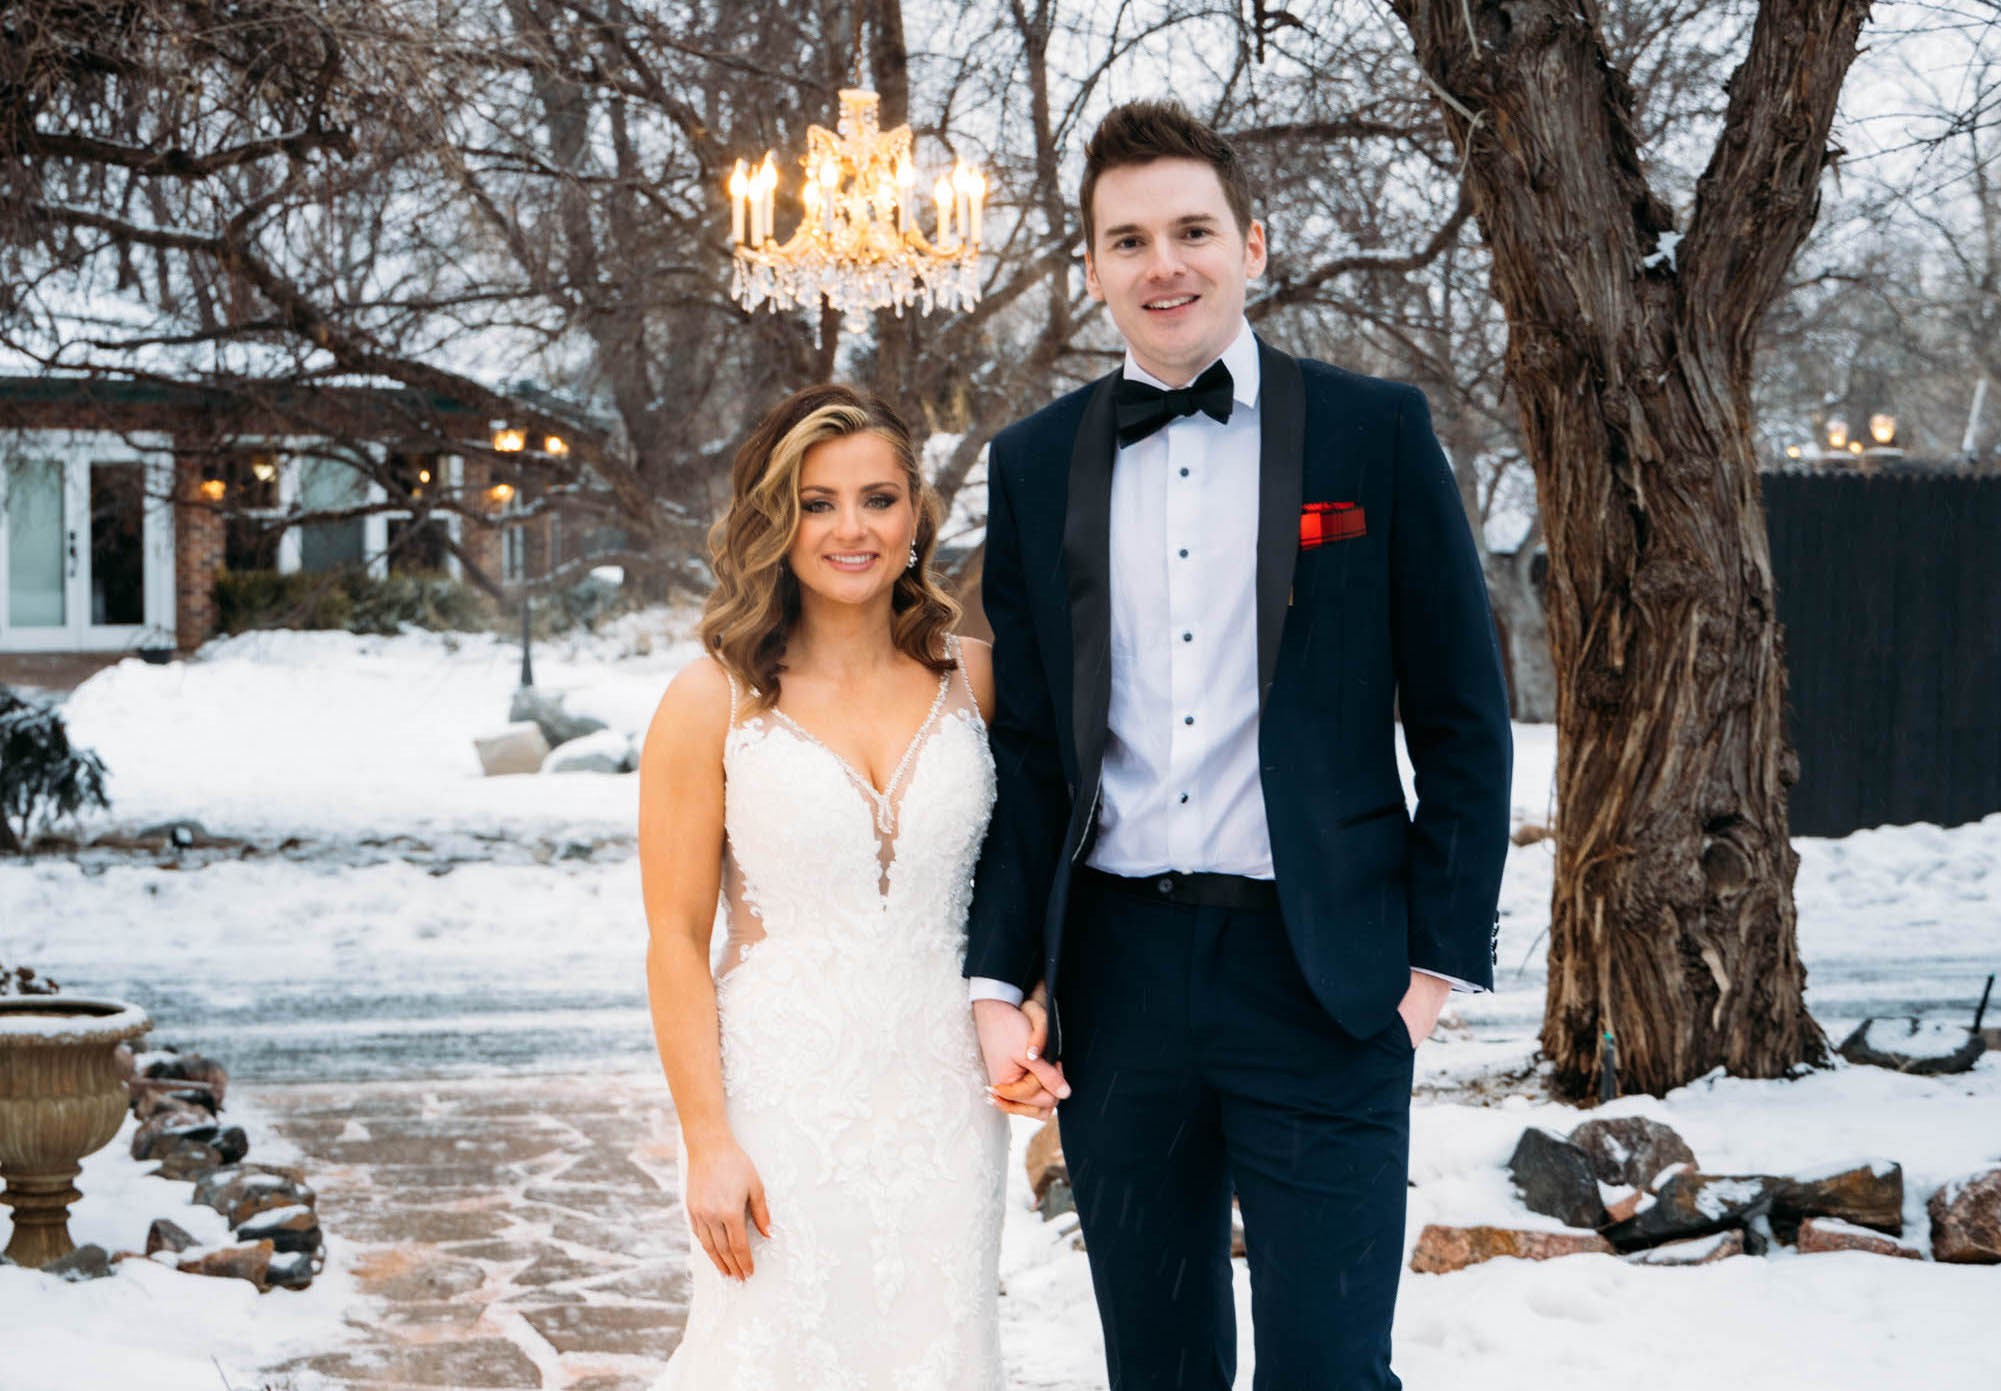 Married at First Sight Recap: Another Denver Couple Divorces